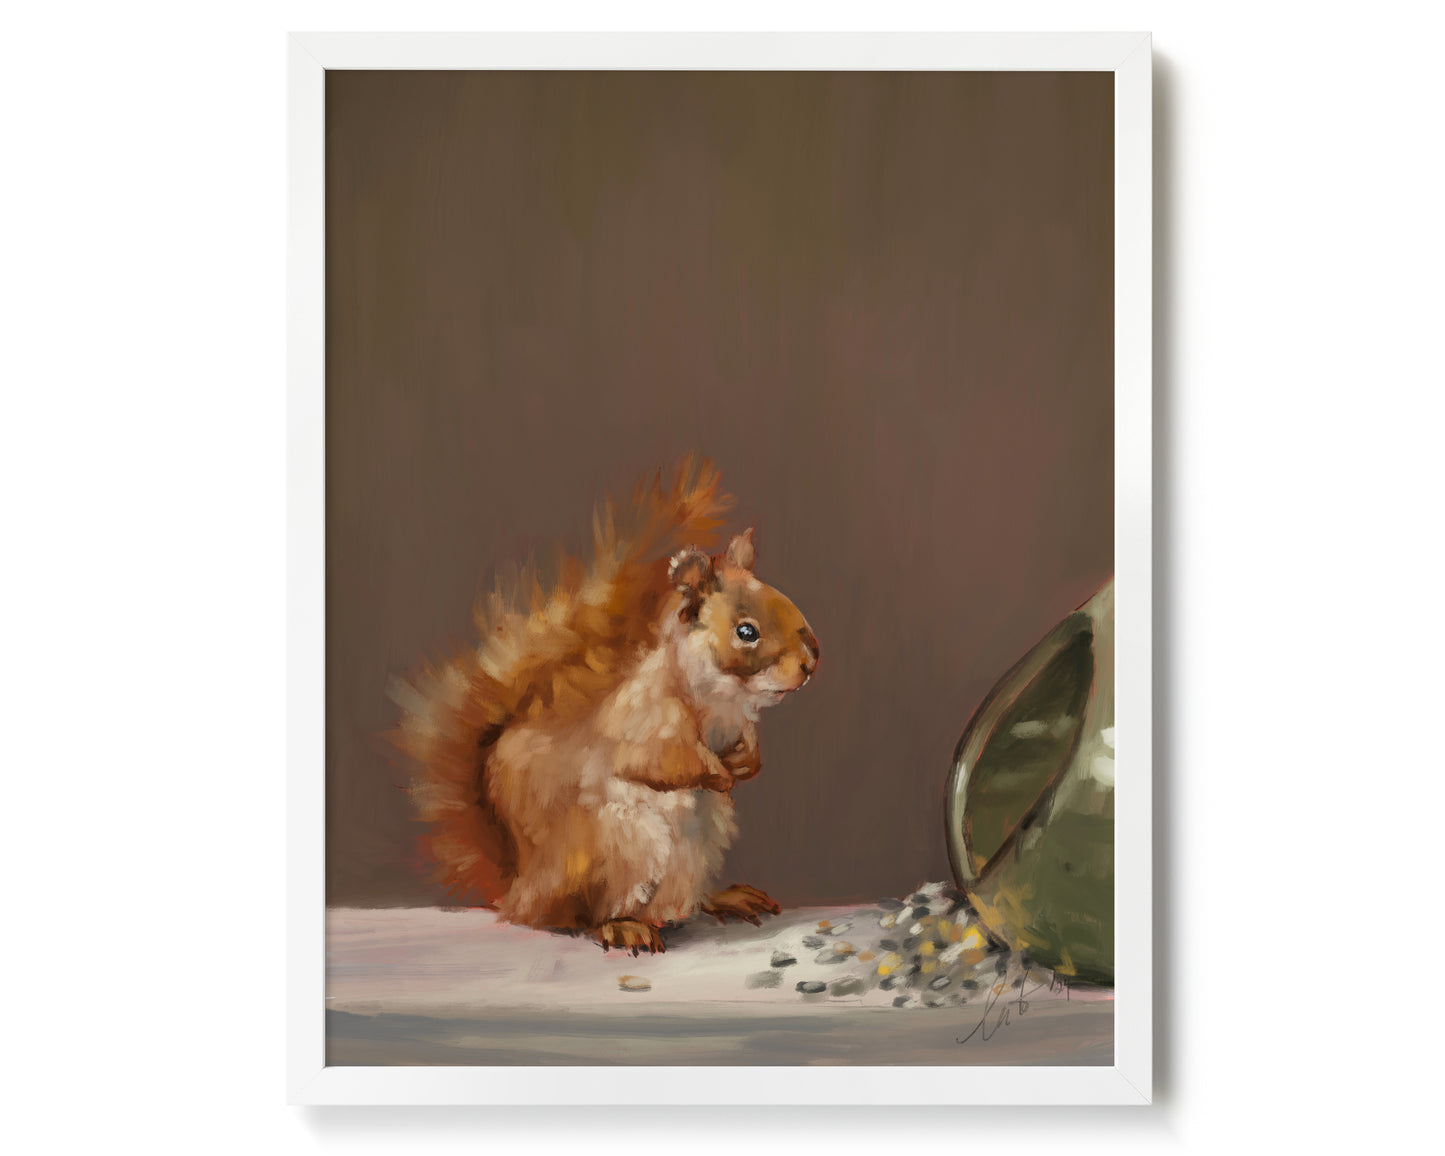 "Titi the Squirrel" by Catherine Hébert - Red Squirrel Oil Painting Giclée Art Print - 16"x20" size